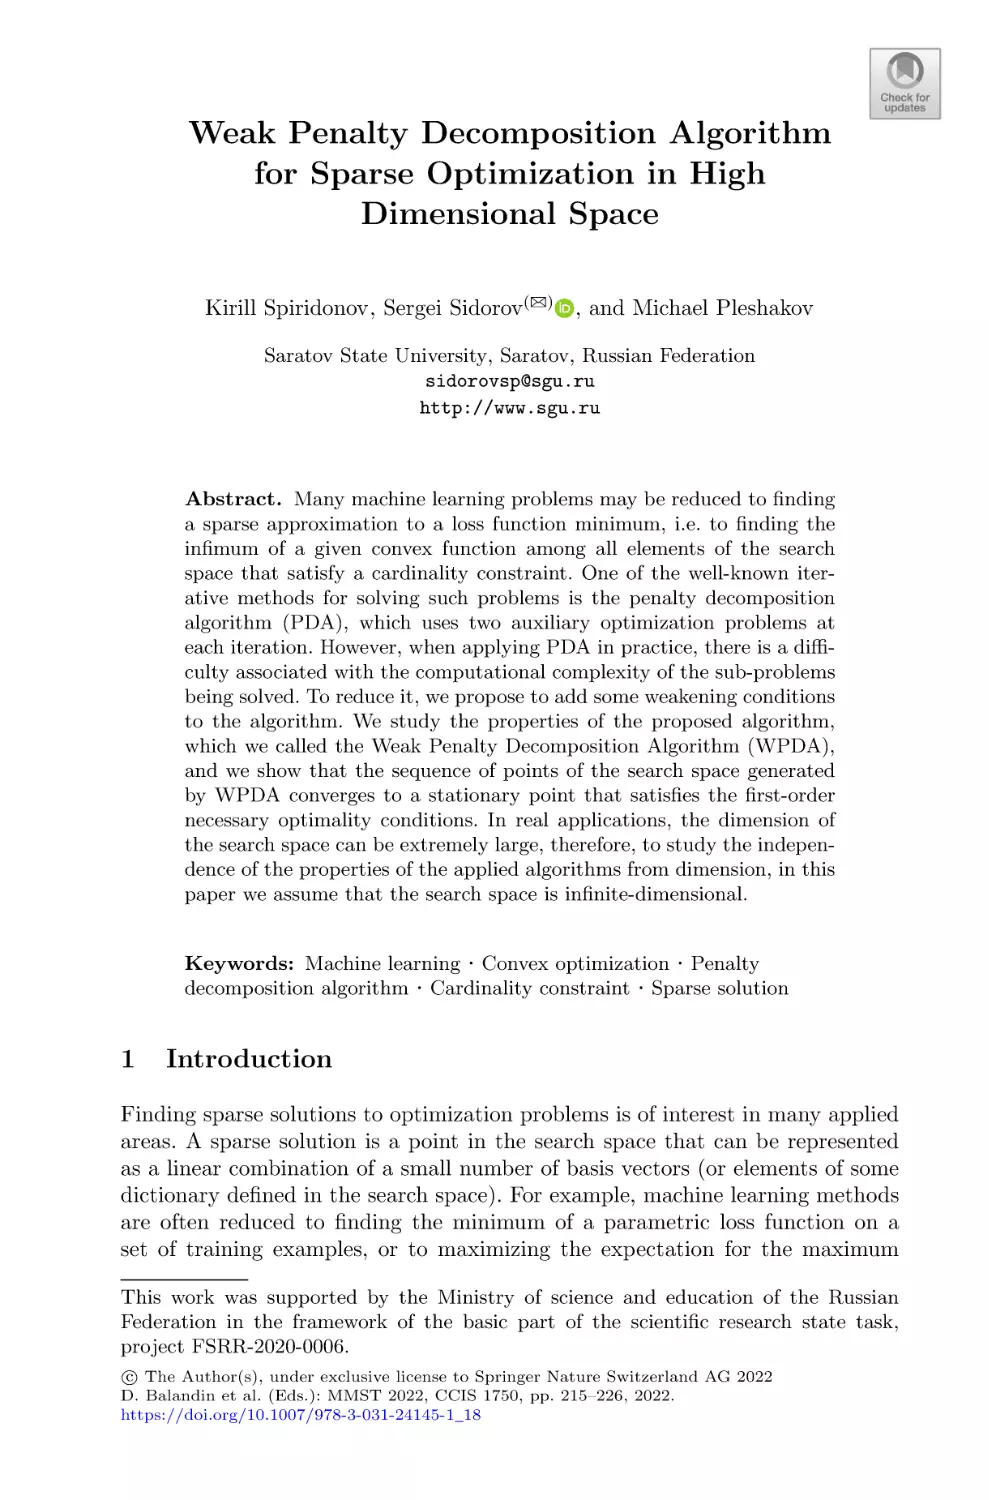 Weak Penalty Decomposition Algorithm for Sparse Optimization in High Dimensional Space
1 Introduction